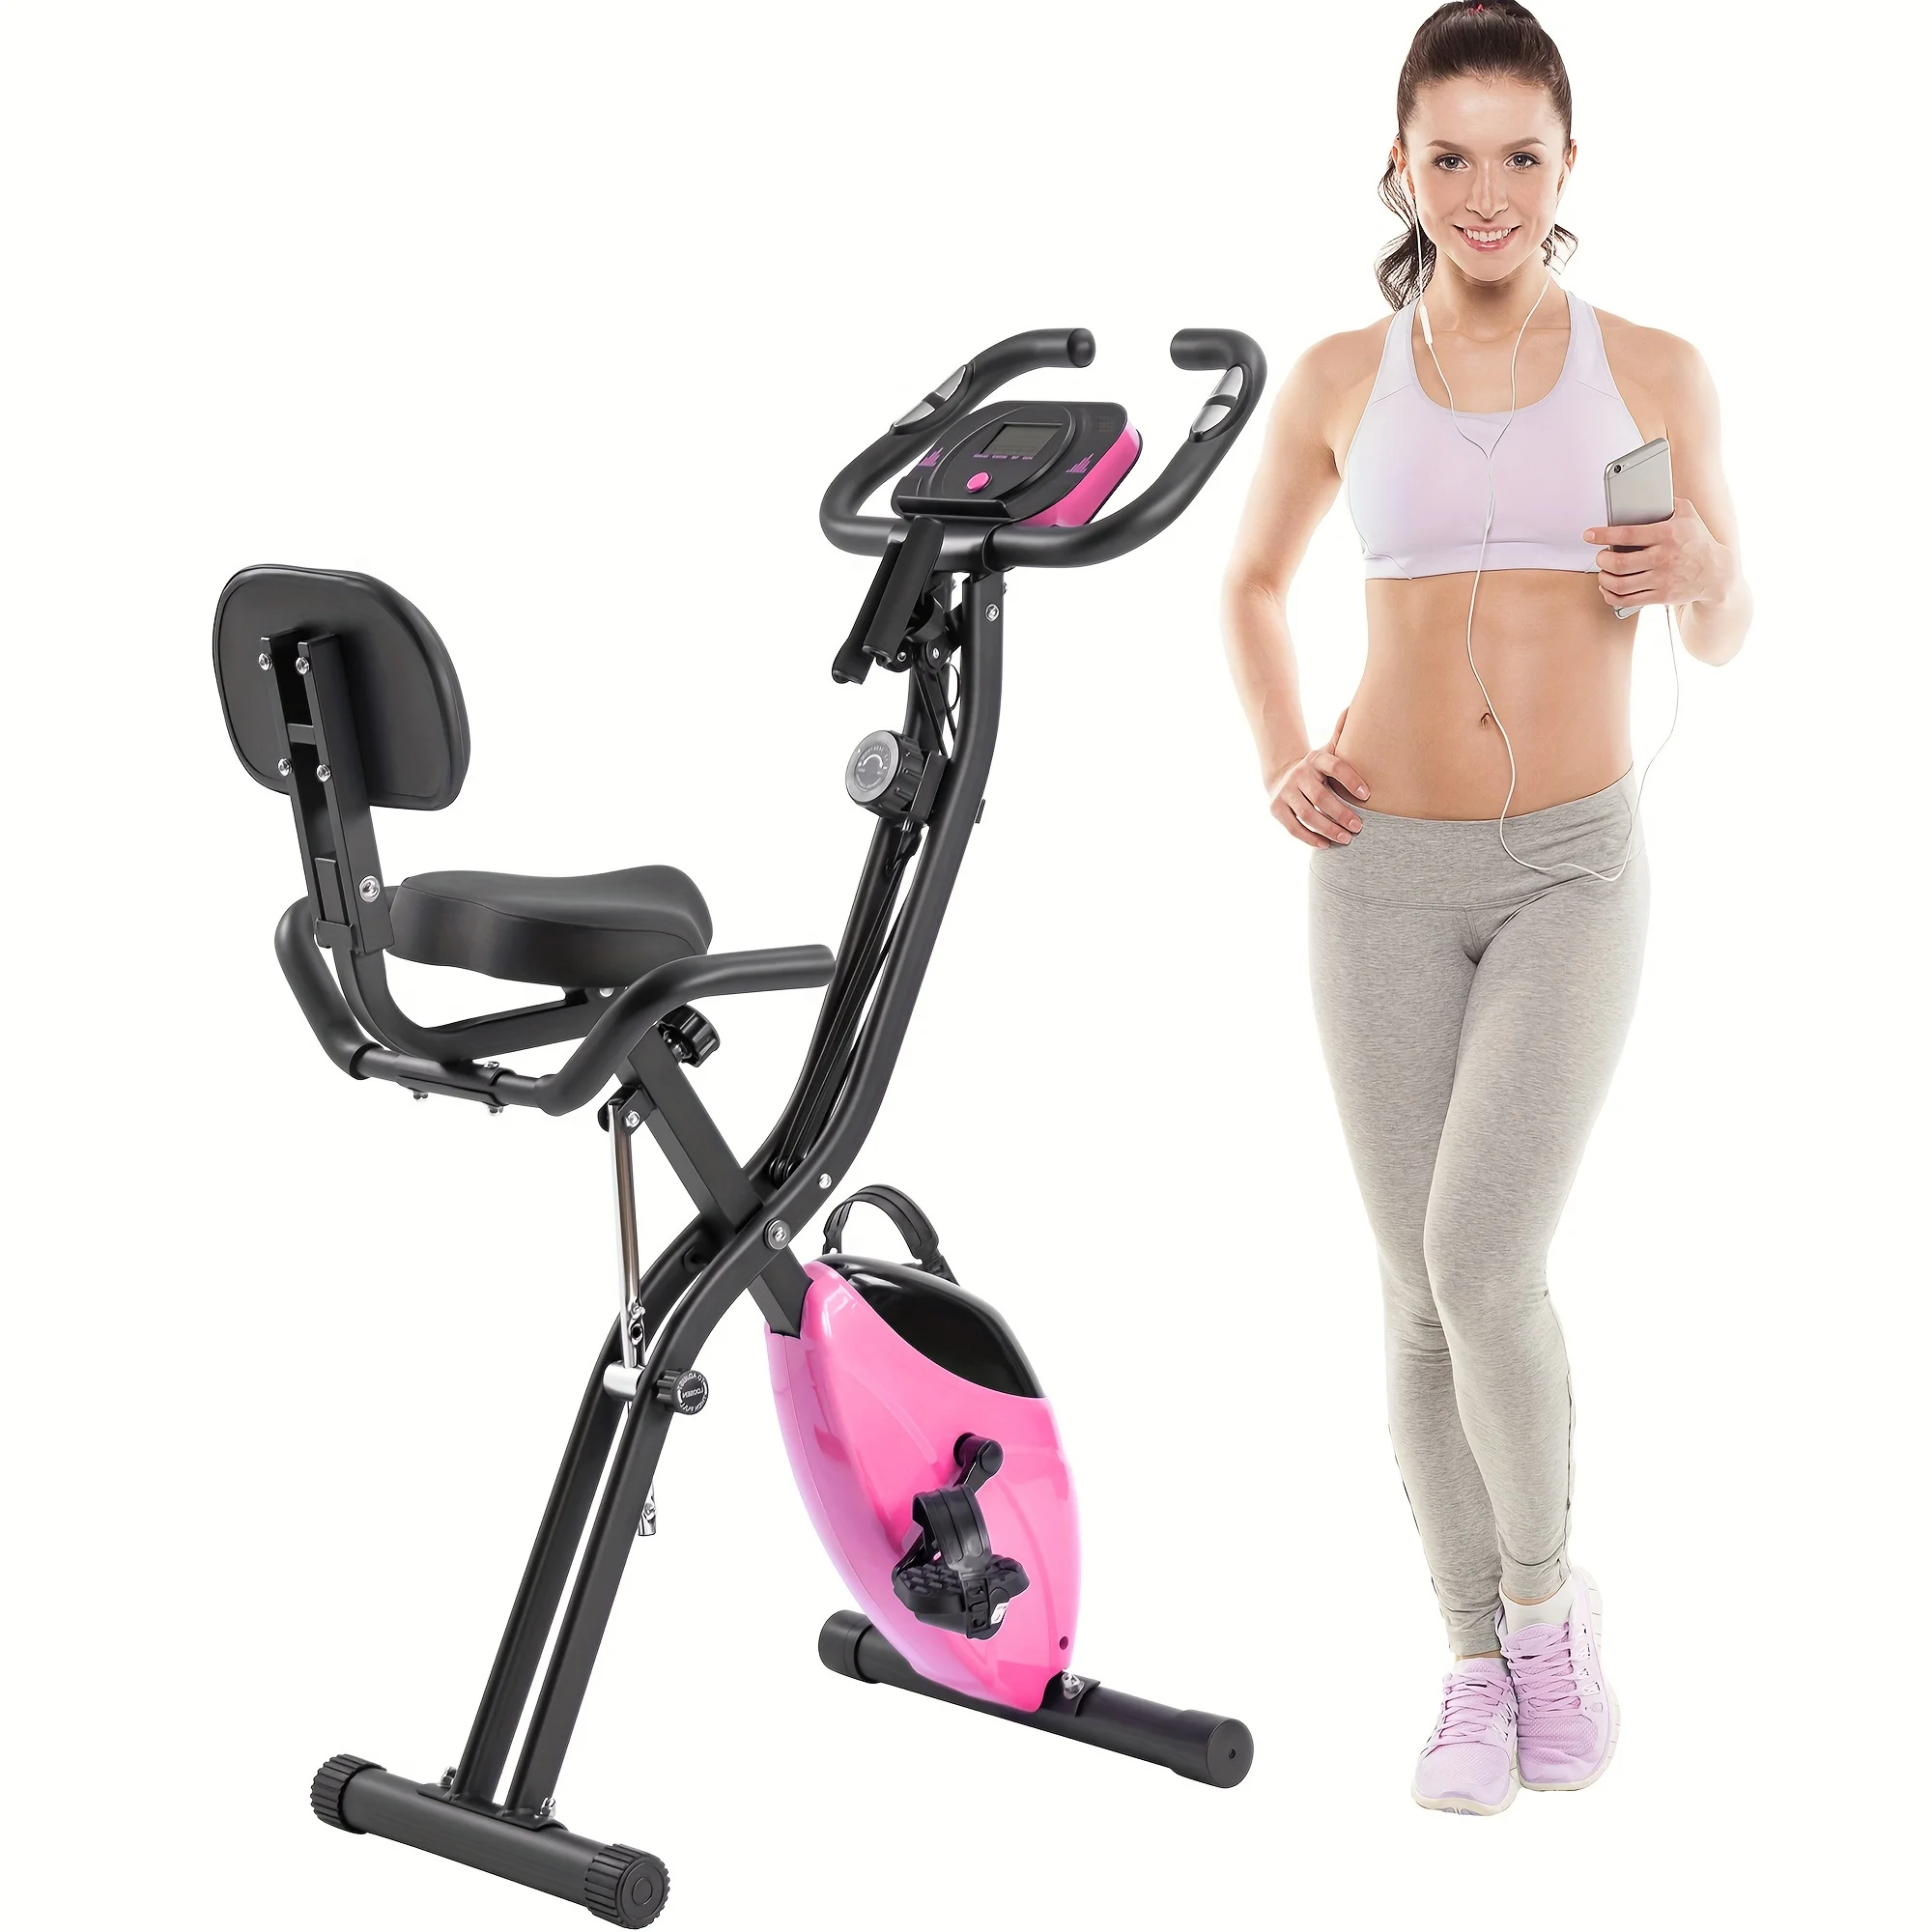 

Adjustable Folding Exercise Bike With 16-Level Resistance, Fitness Upright And Recumbent X-Bike With Backrest, Home Gym Equipmen